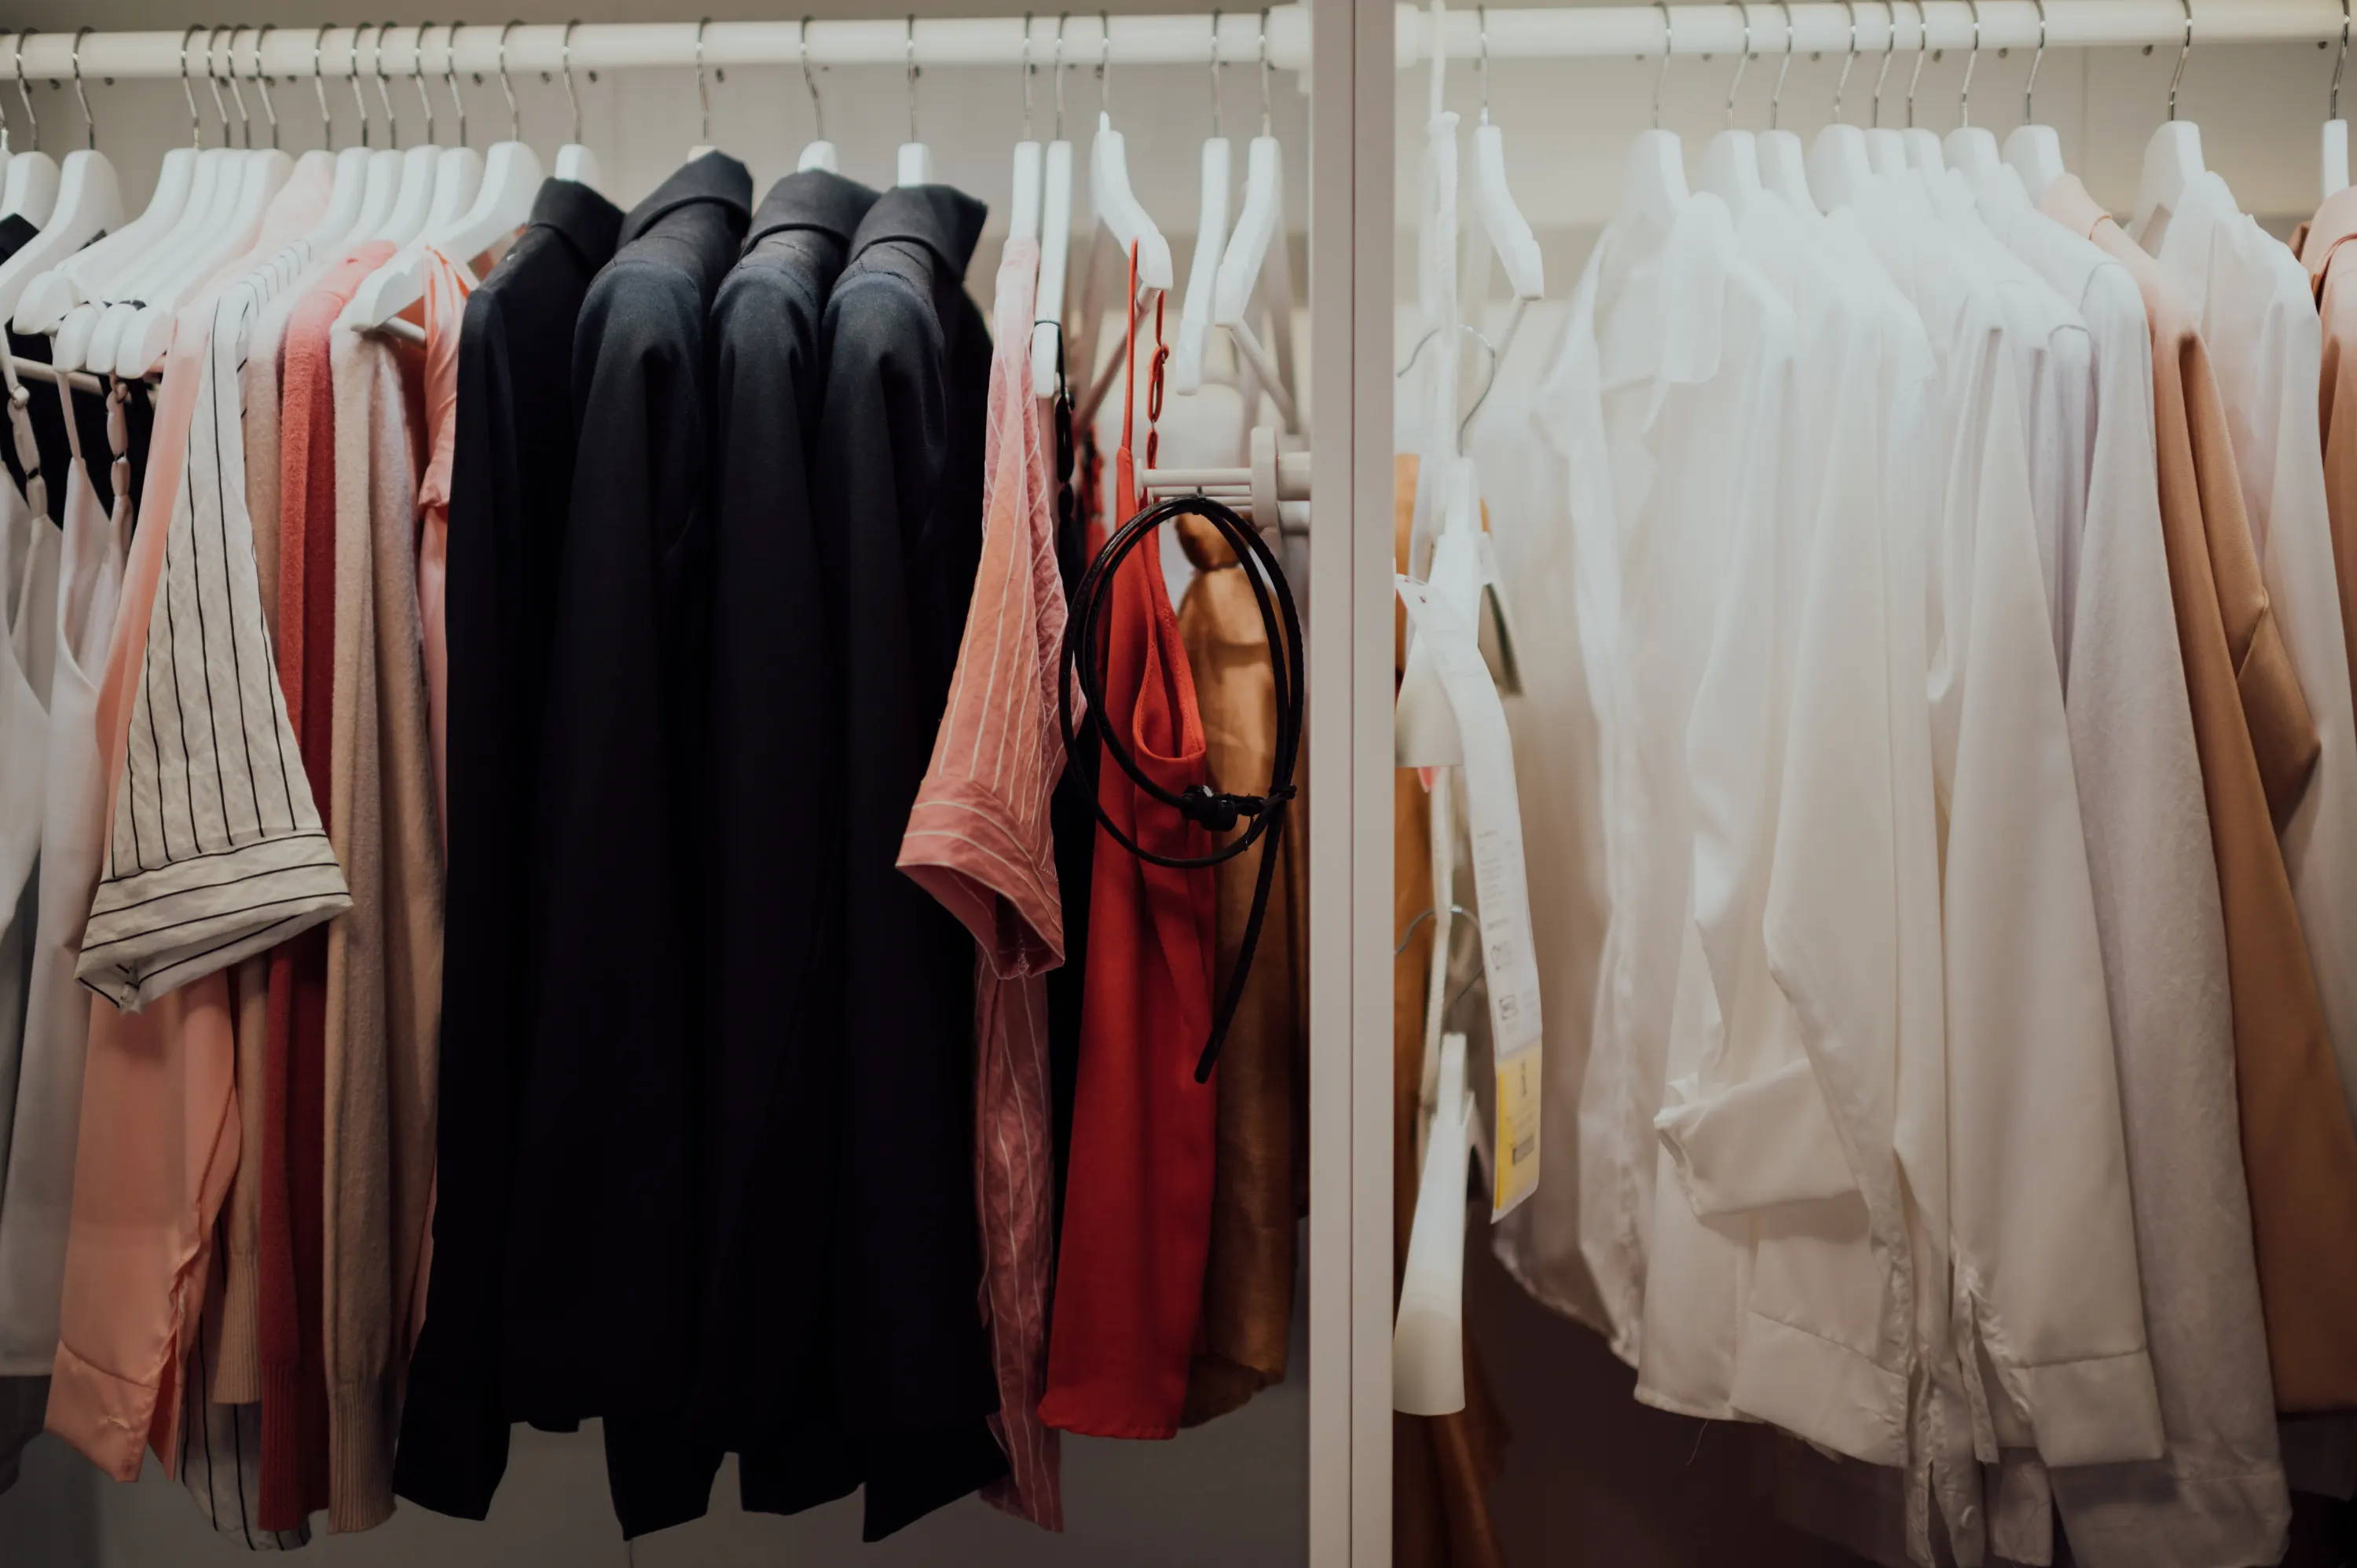 Clothes on a rack in a closet.